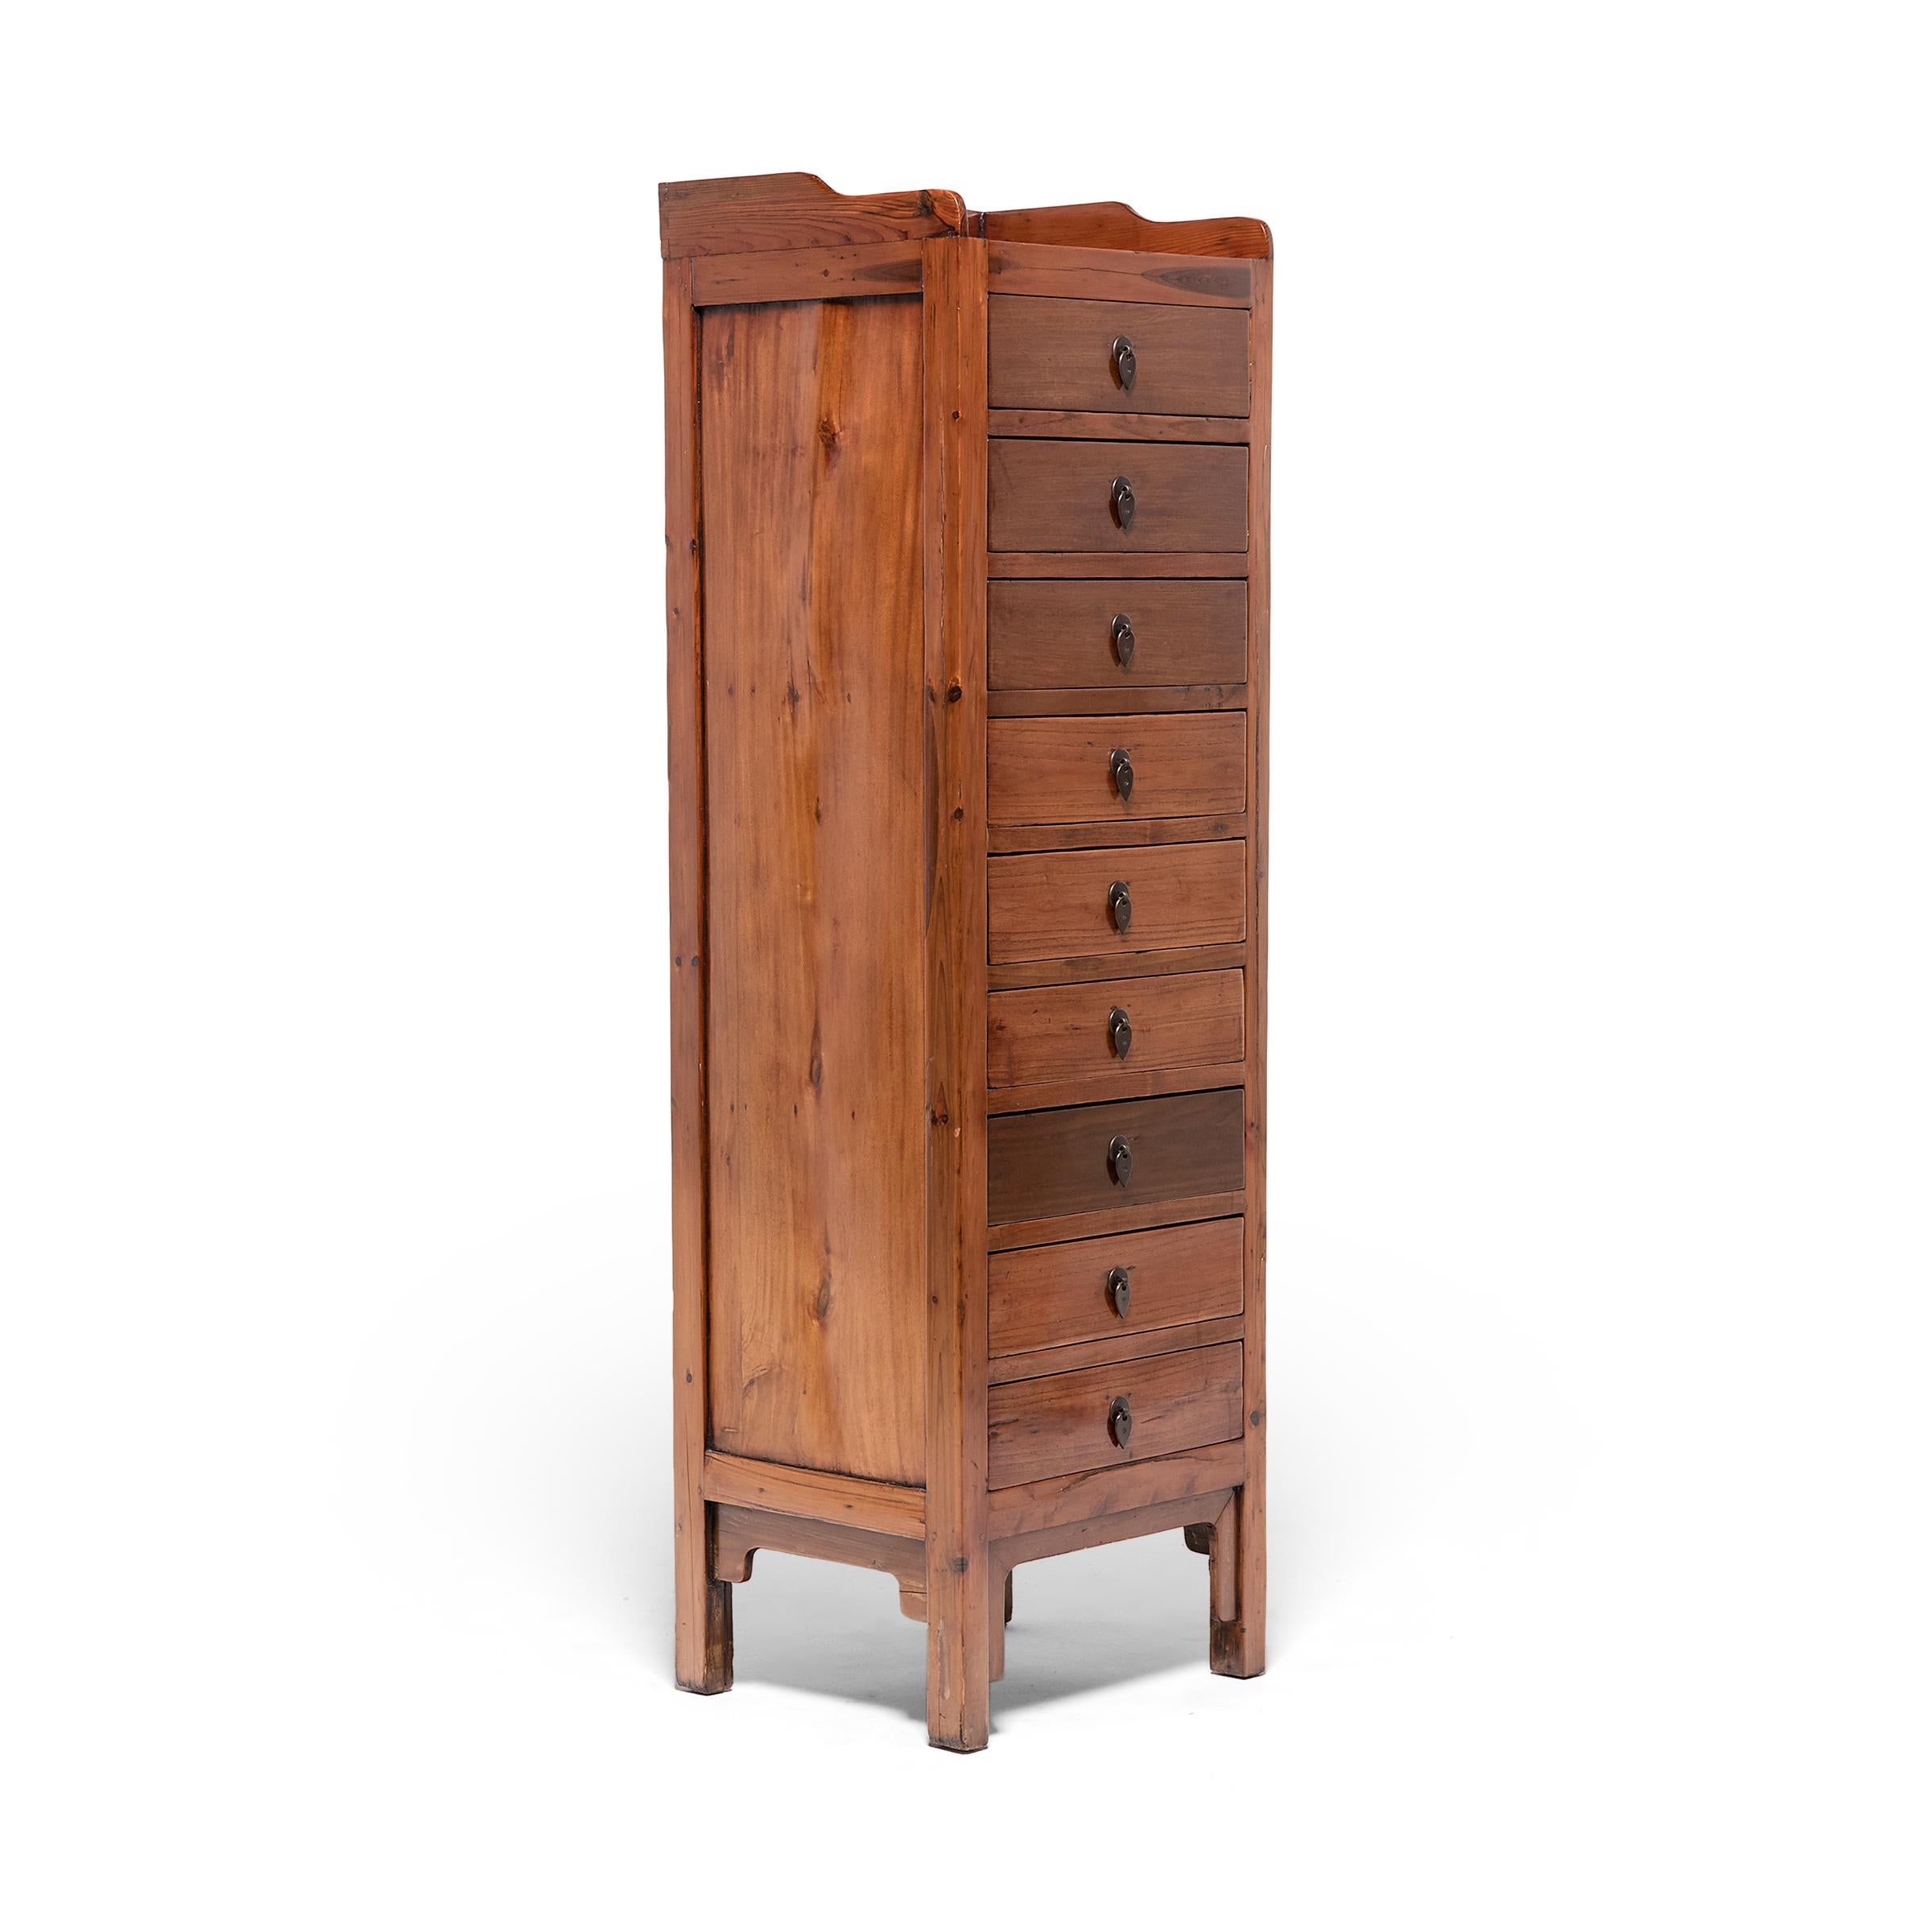 Just like contemporary flat-file storage, this tall camphor chest once provided a Qing-dynasty official or businessman with ample storage to organize flat documents and important papers. Dated to the late 19th century, the upright cabinet has nine